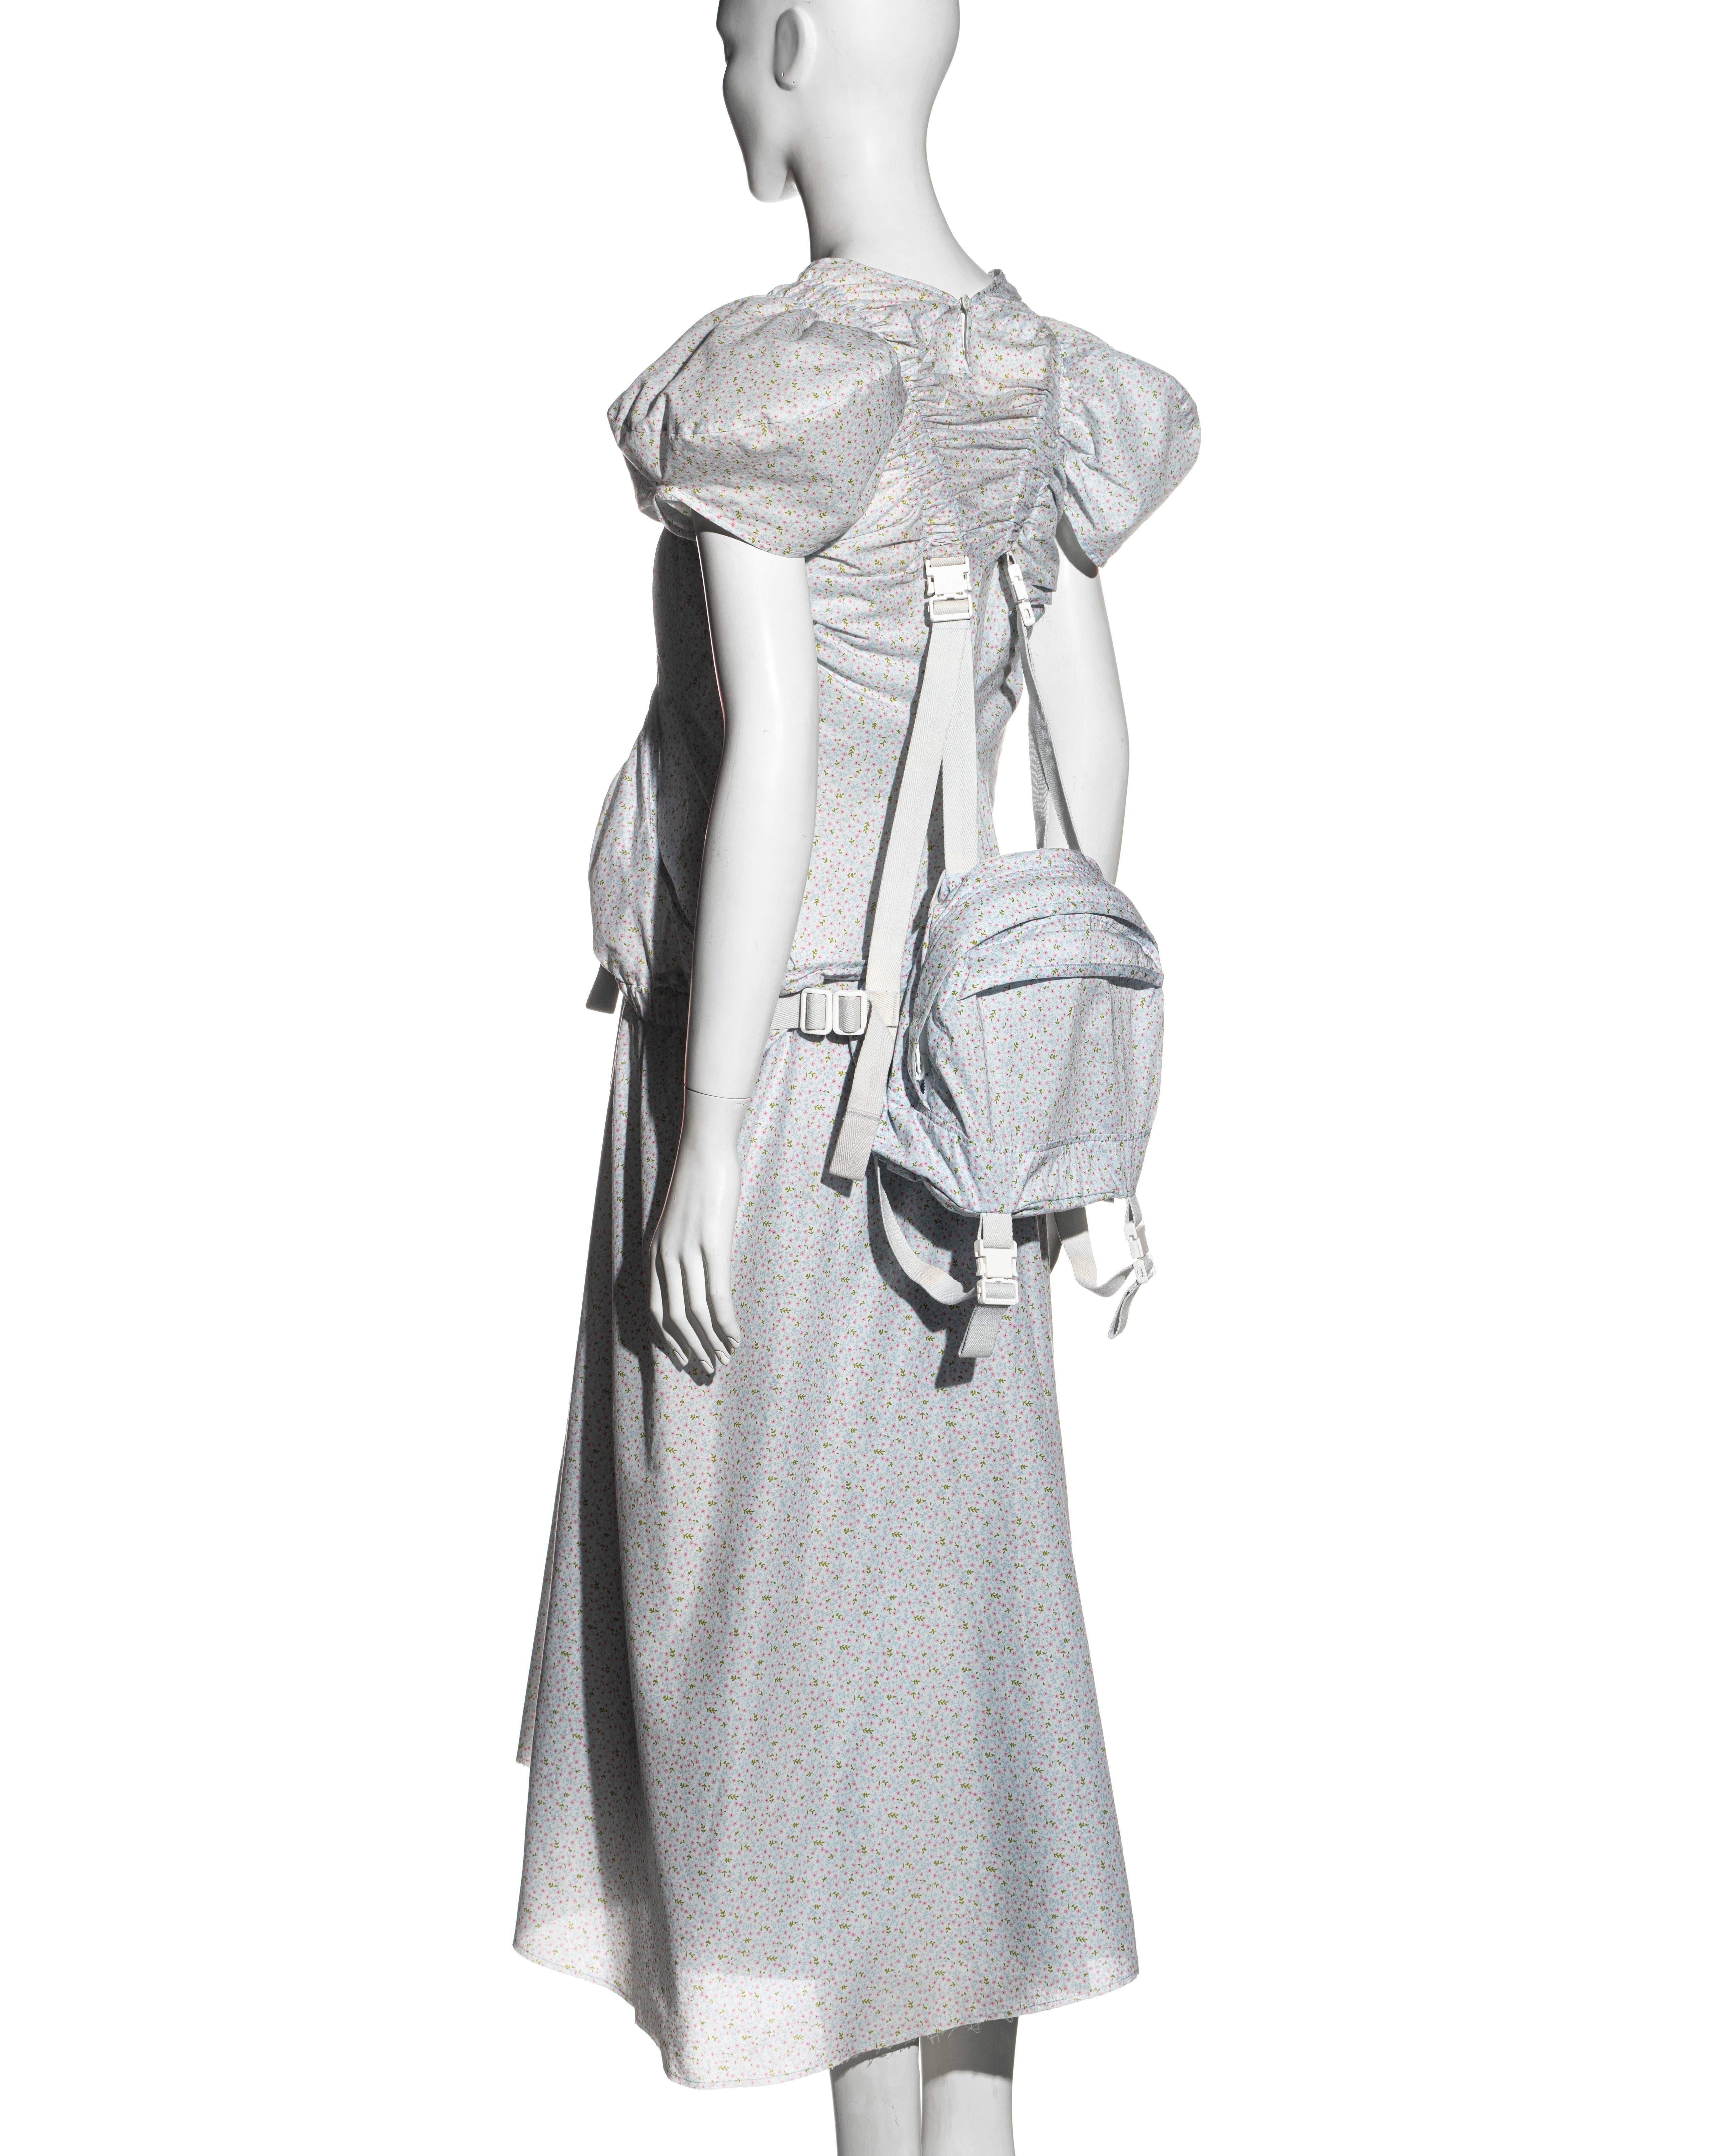 Junya Watanabe floral cotton dress with harness straps and backpack, ss 2003 In Excellent Condition For Sale In London, GB